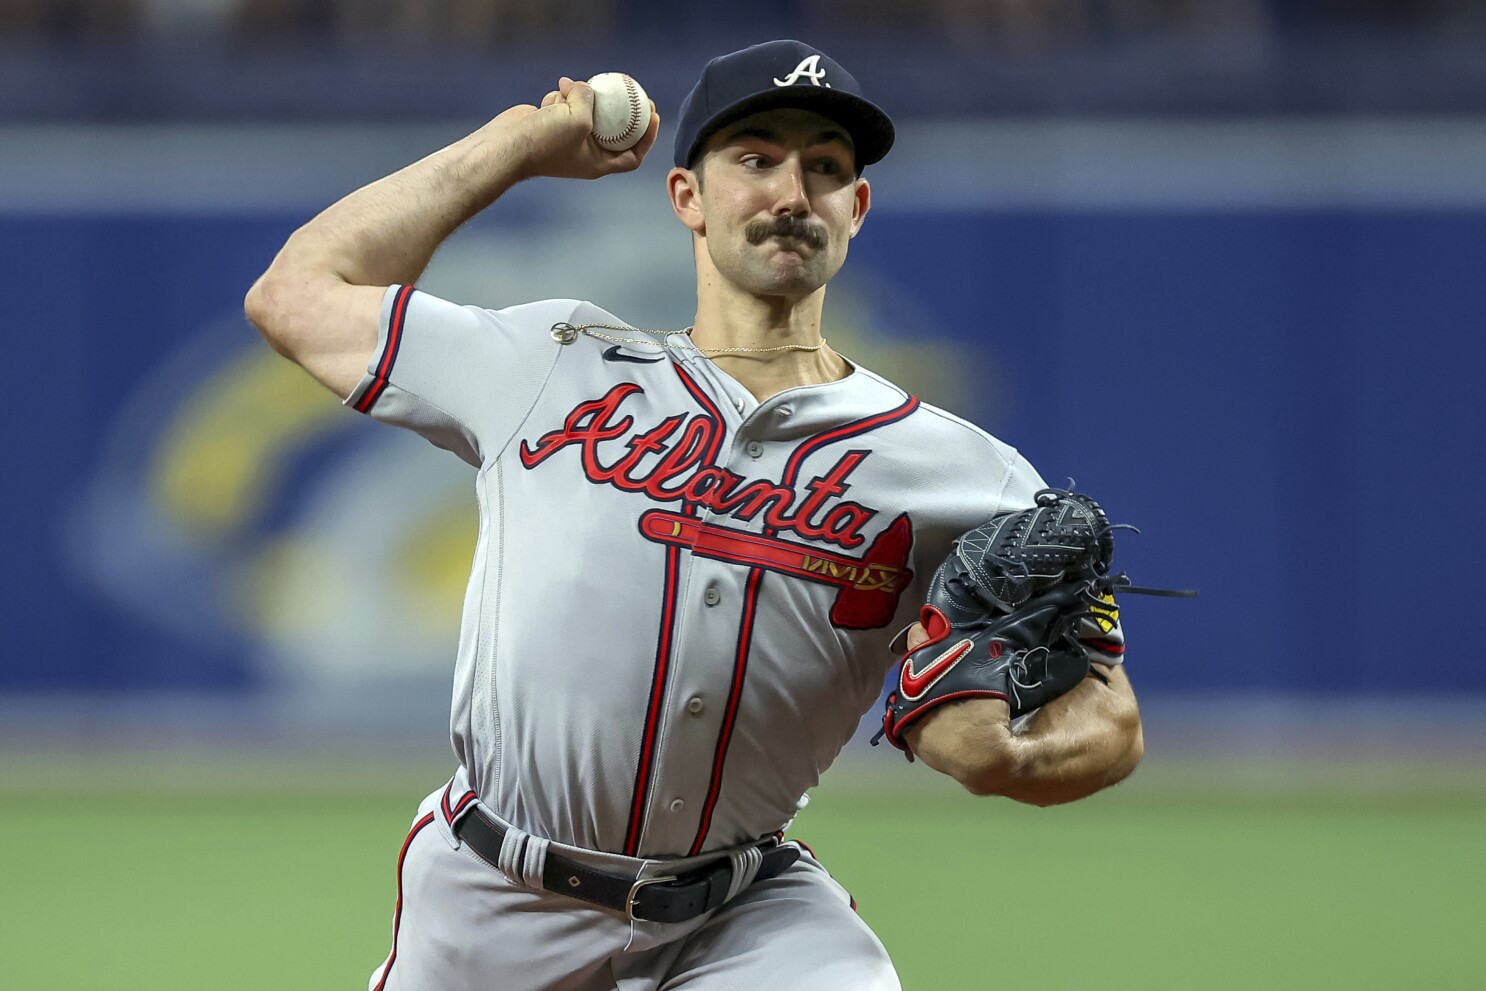 Strider cruises, the majors-best Braves pound the Rays 6-1 in